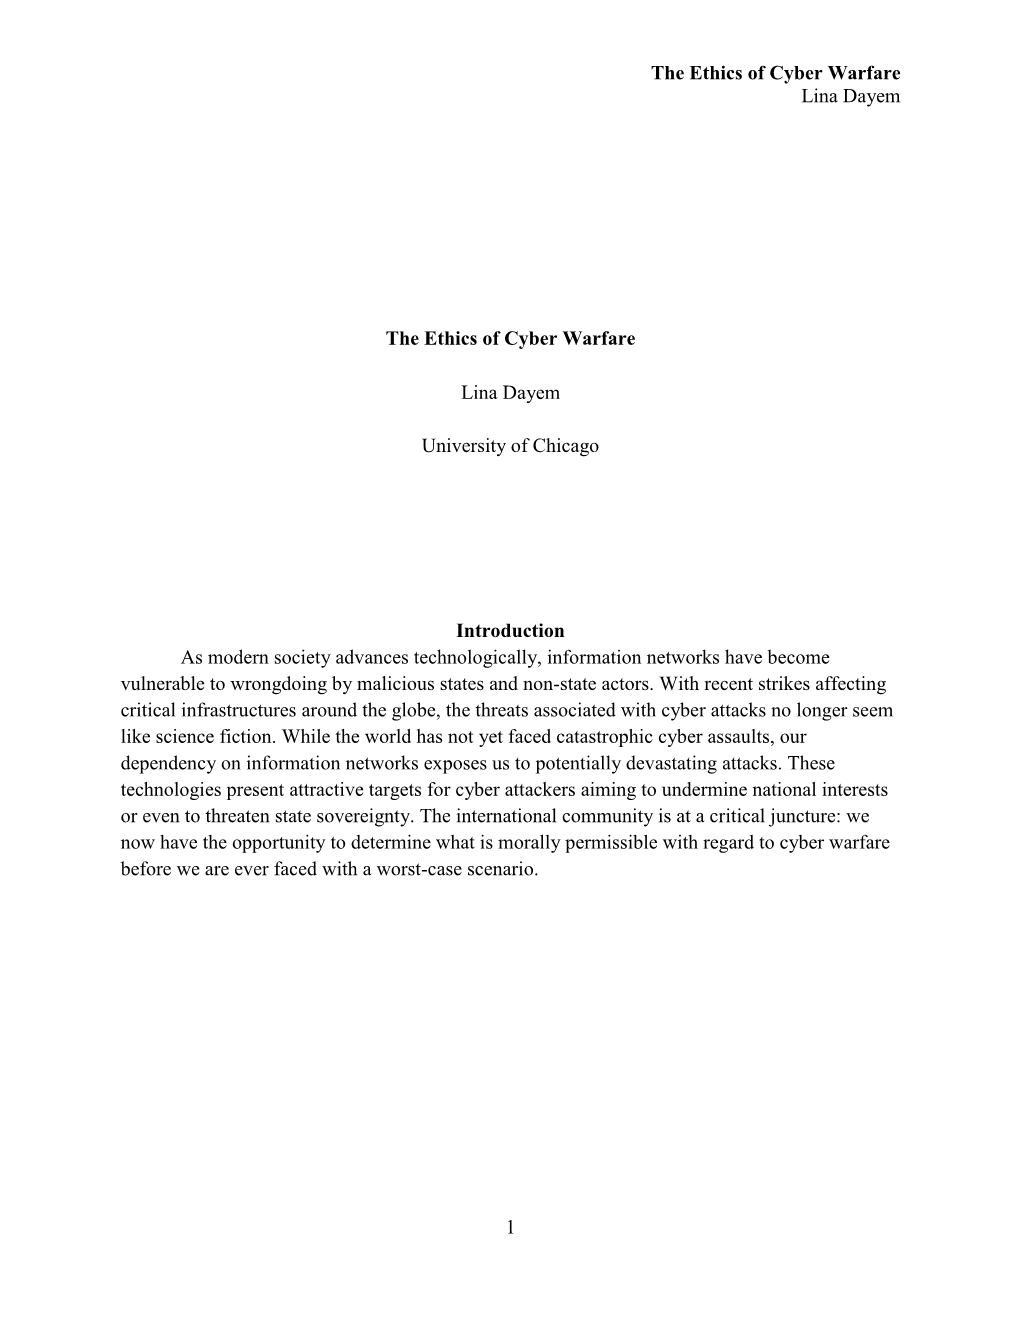 The Ethics of Cyber Warfare Lina Dayem 1 the Ethics of Cyber